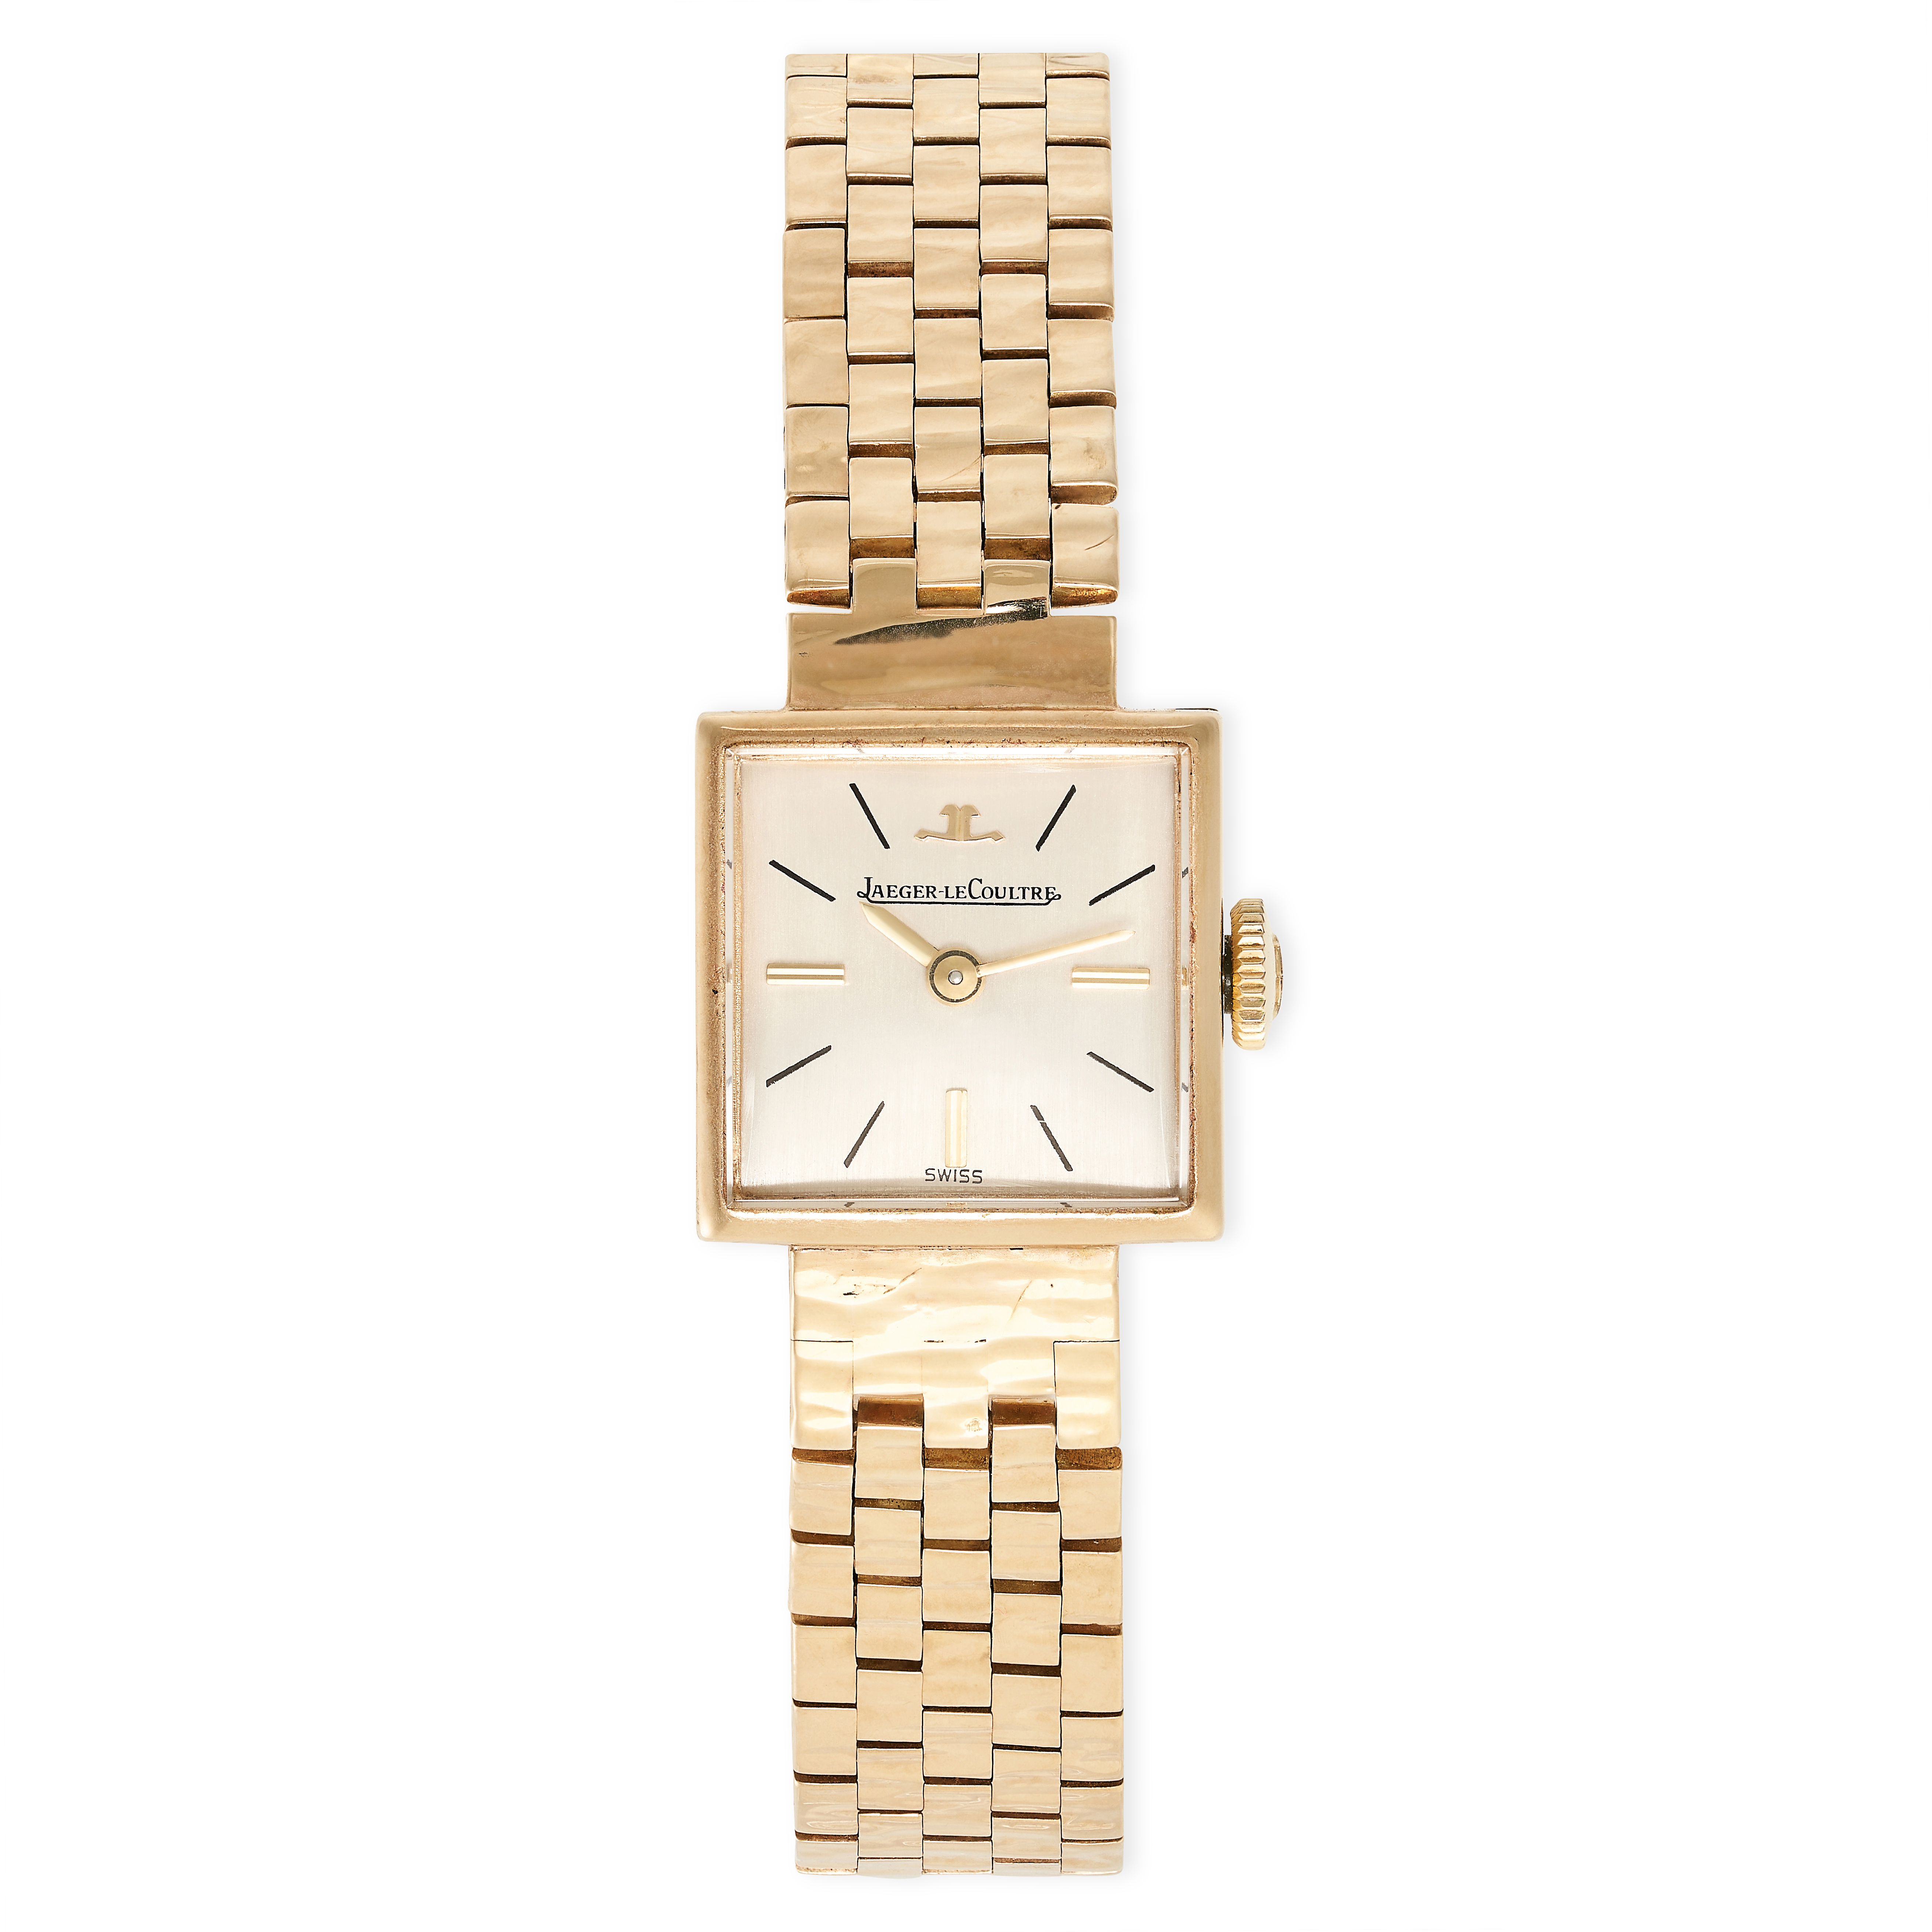 JAEGER-LECOULTRE, A VINTAGE LADIES YELLOW GOLD WRISTWATCH, in 9ct yellow gold, the square face